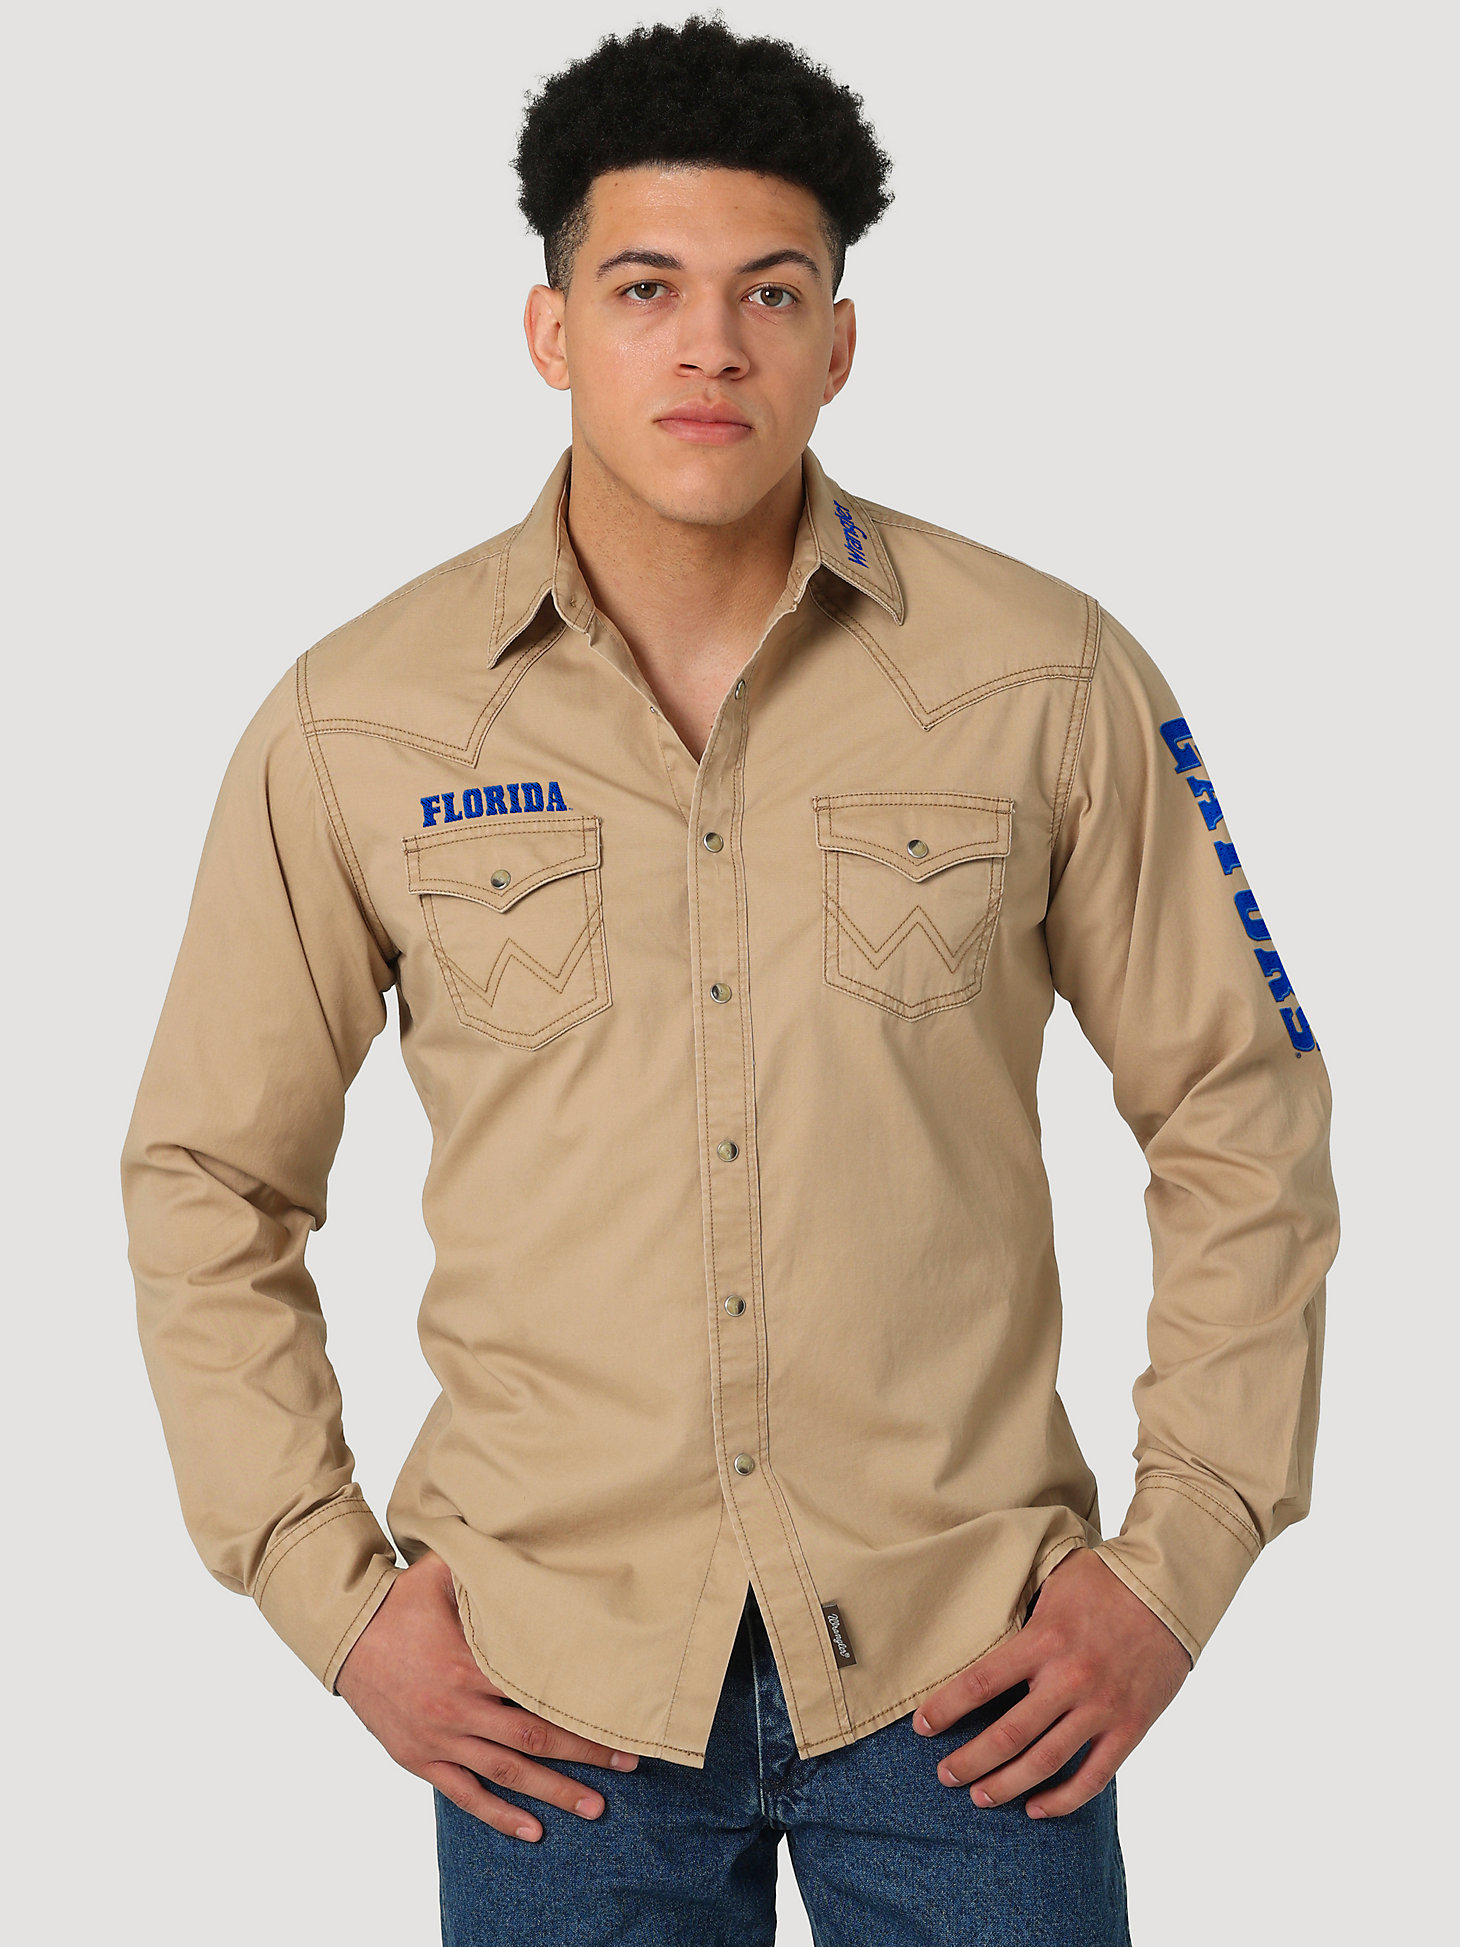 Wrangler Collegiate Embroidered Twill Western Snap Shirt in University of Florida main view